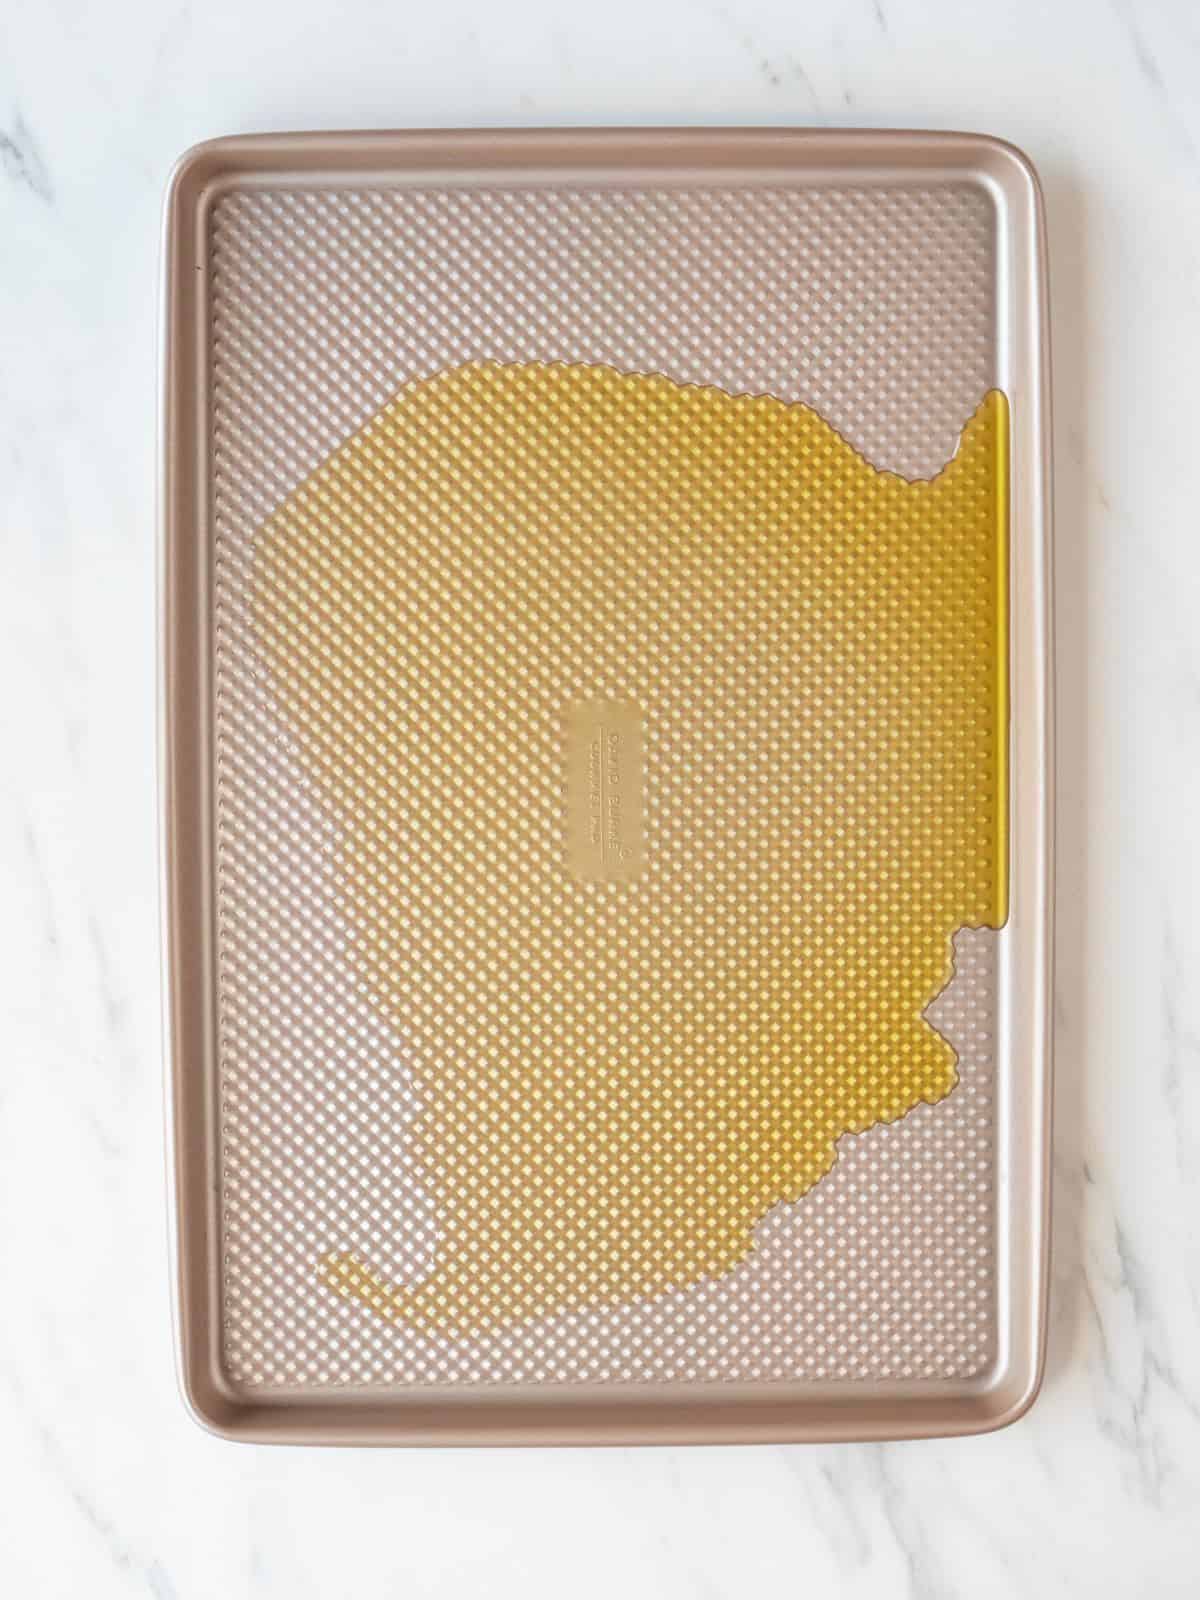 A baking sheet with hot oil on it.